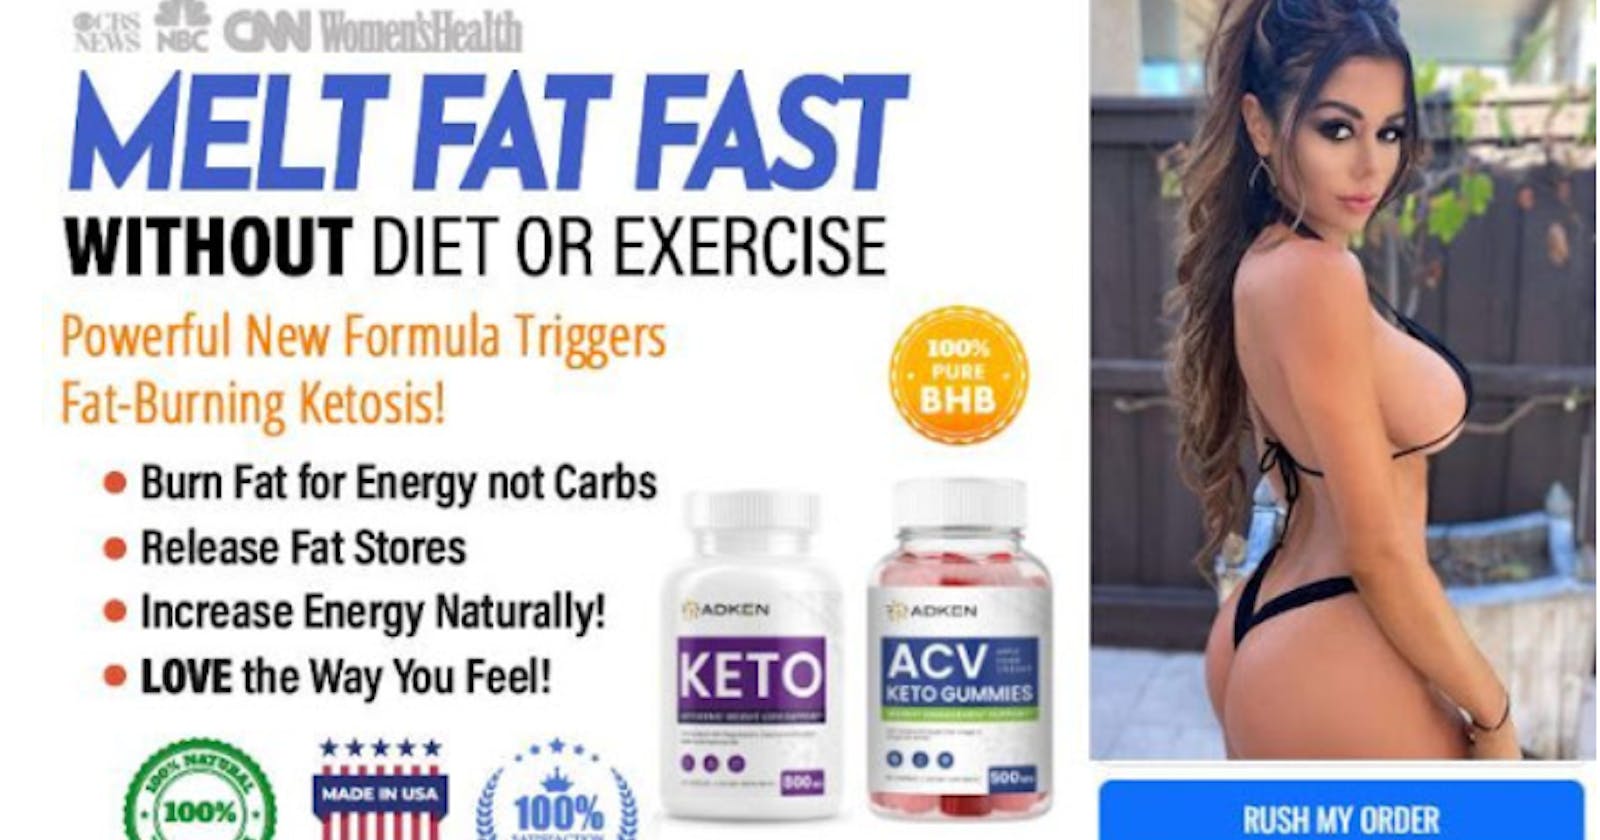 Adken Keto ACV Gummies Weight Loss Results or Side Effects?